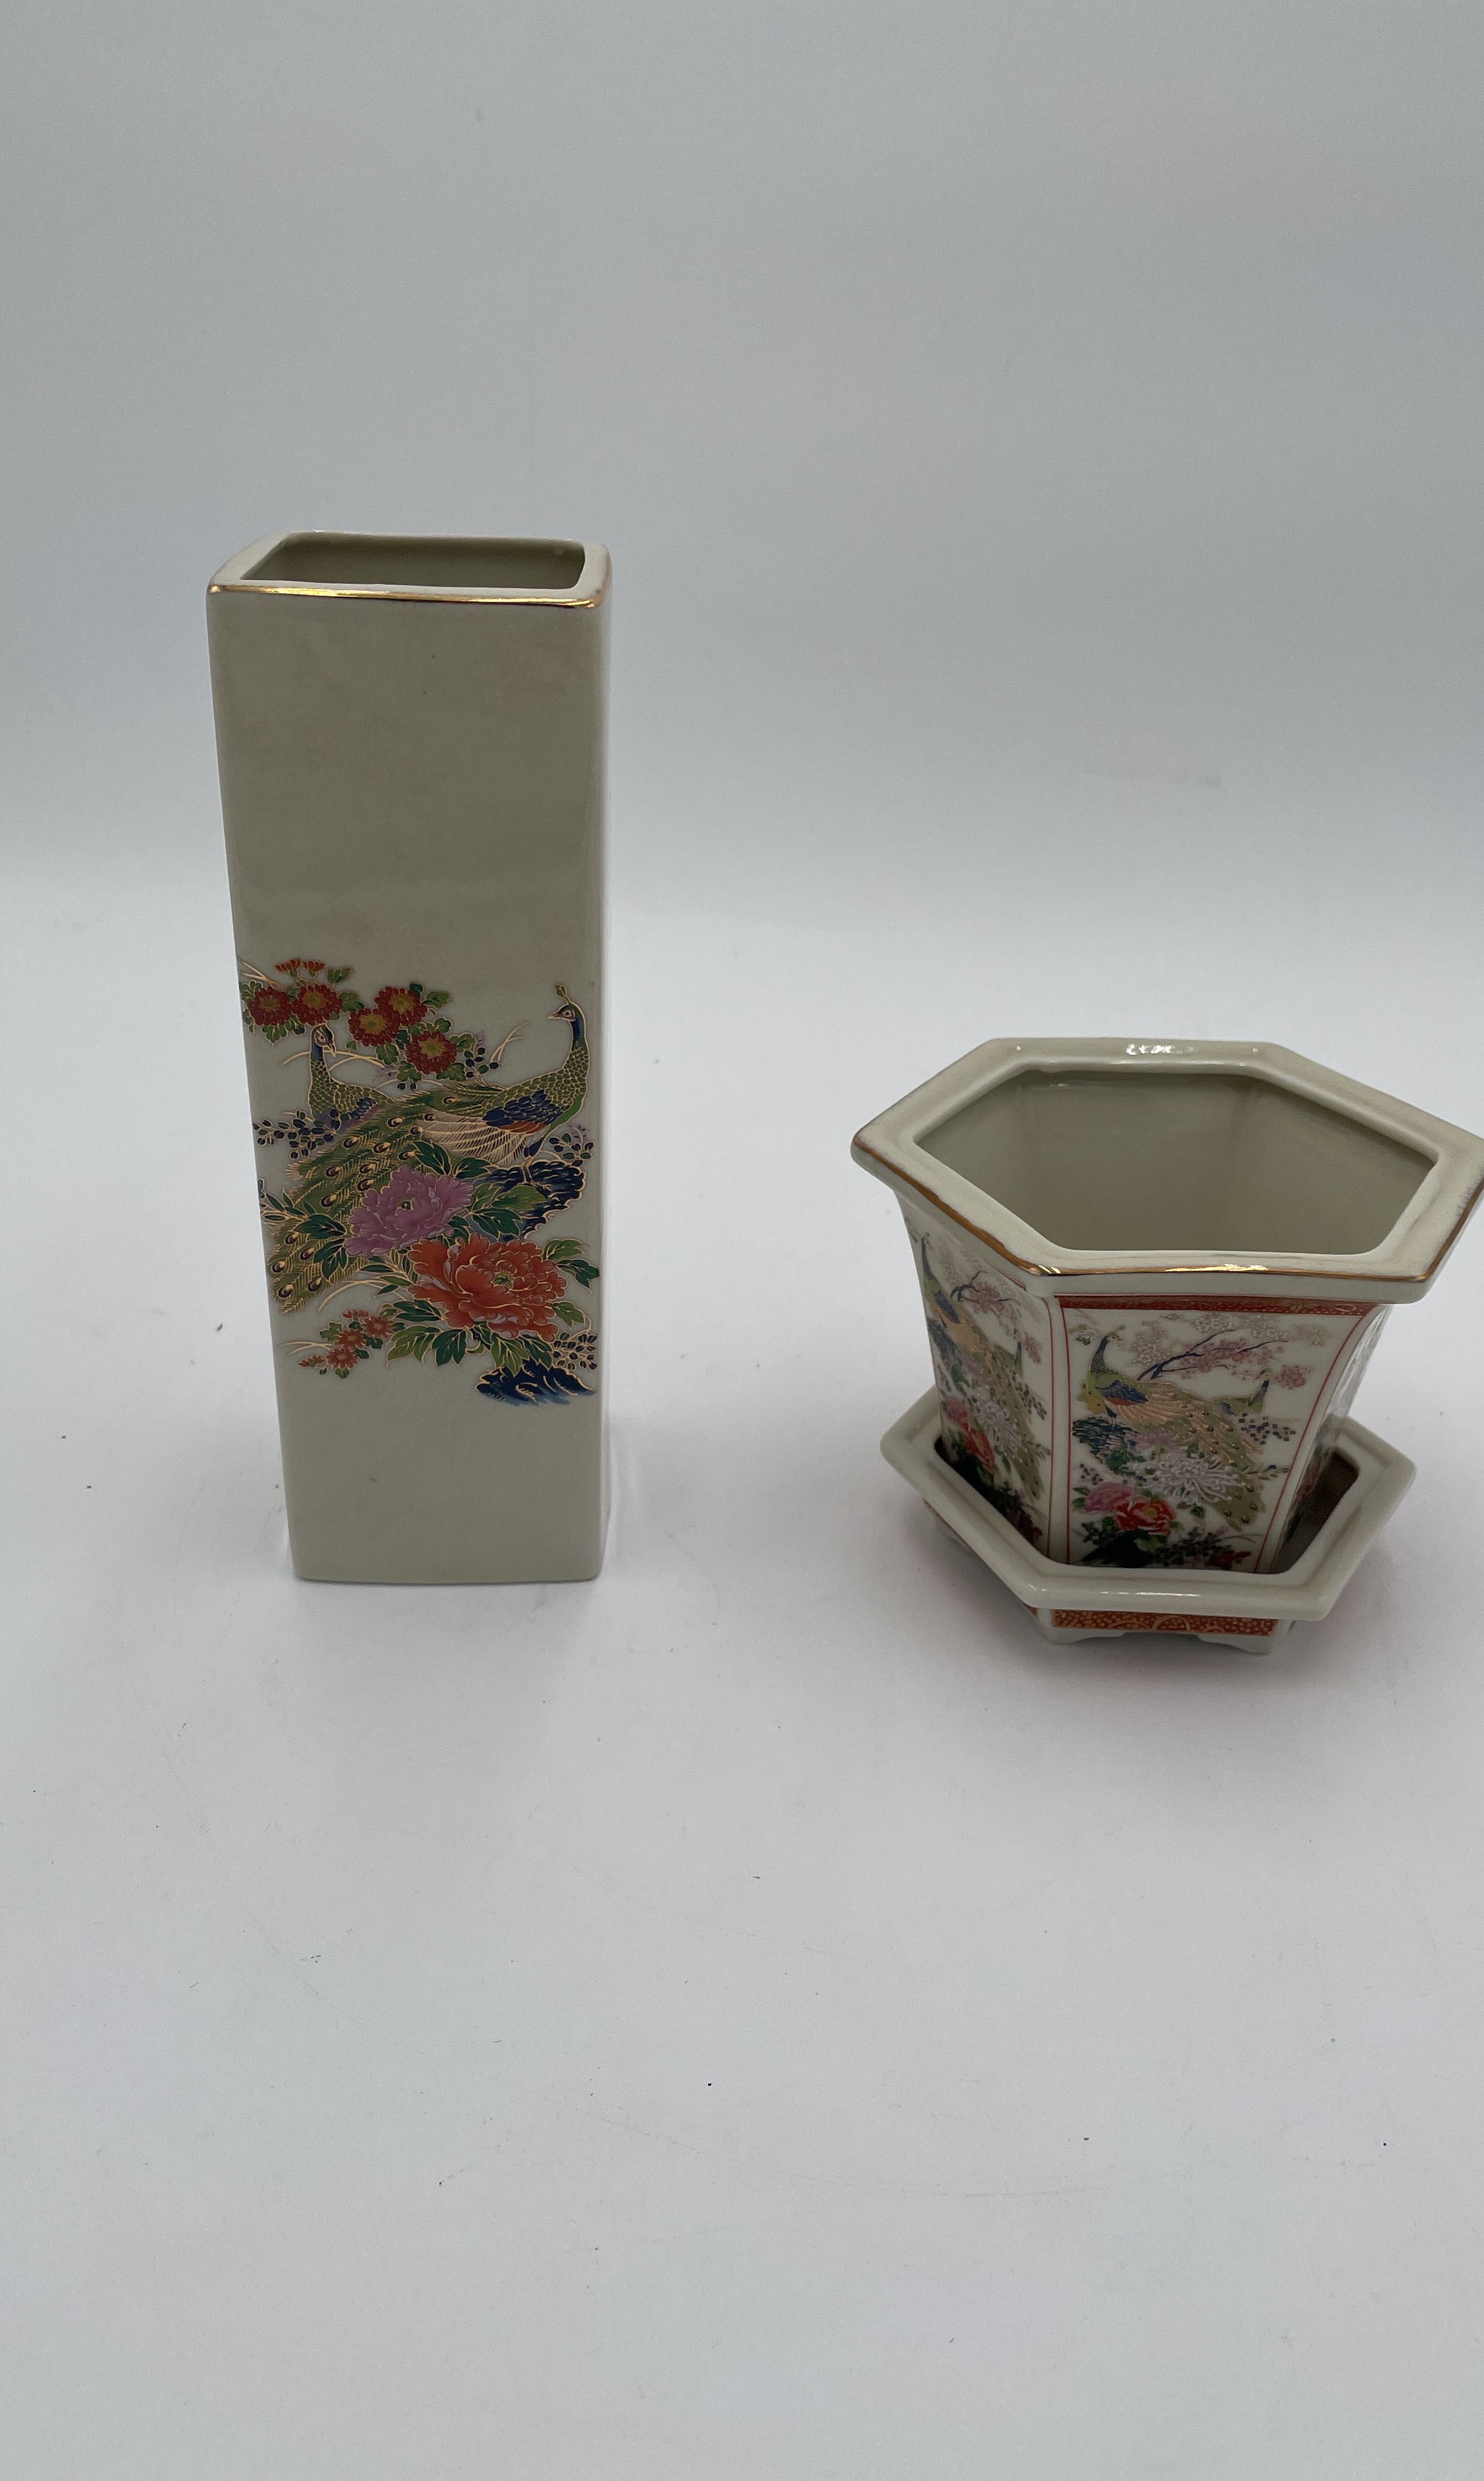 Sold at Auction: Vintage Pocket Tackle Box, Small Chinese Theme